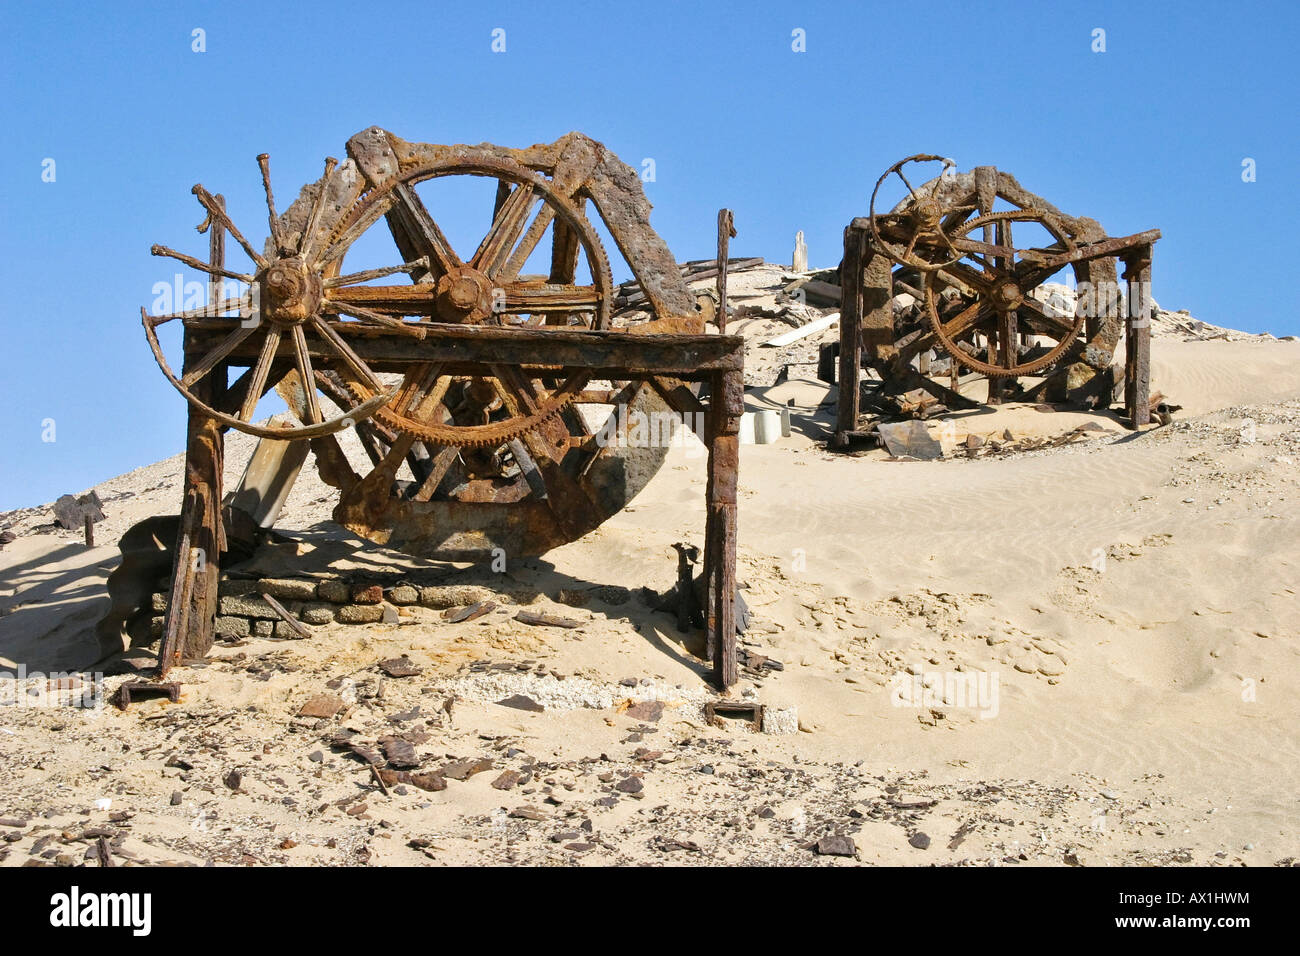 Old strong rusted parts for diamonds searching in sand, diamond prohibited area, Saddlehill, Namibia, Africa Stock Photo